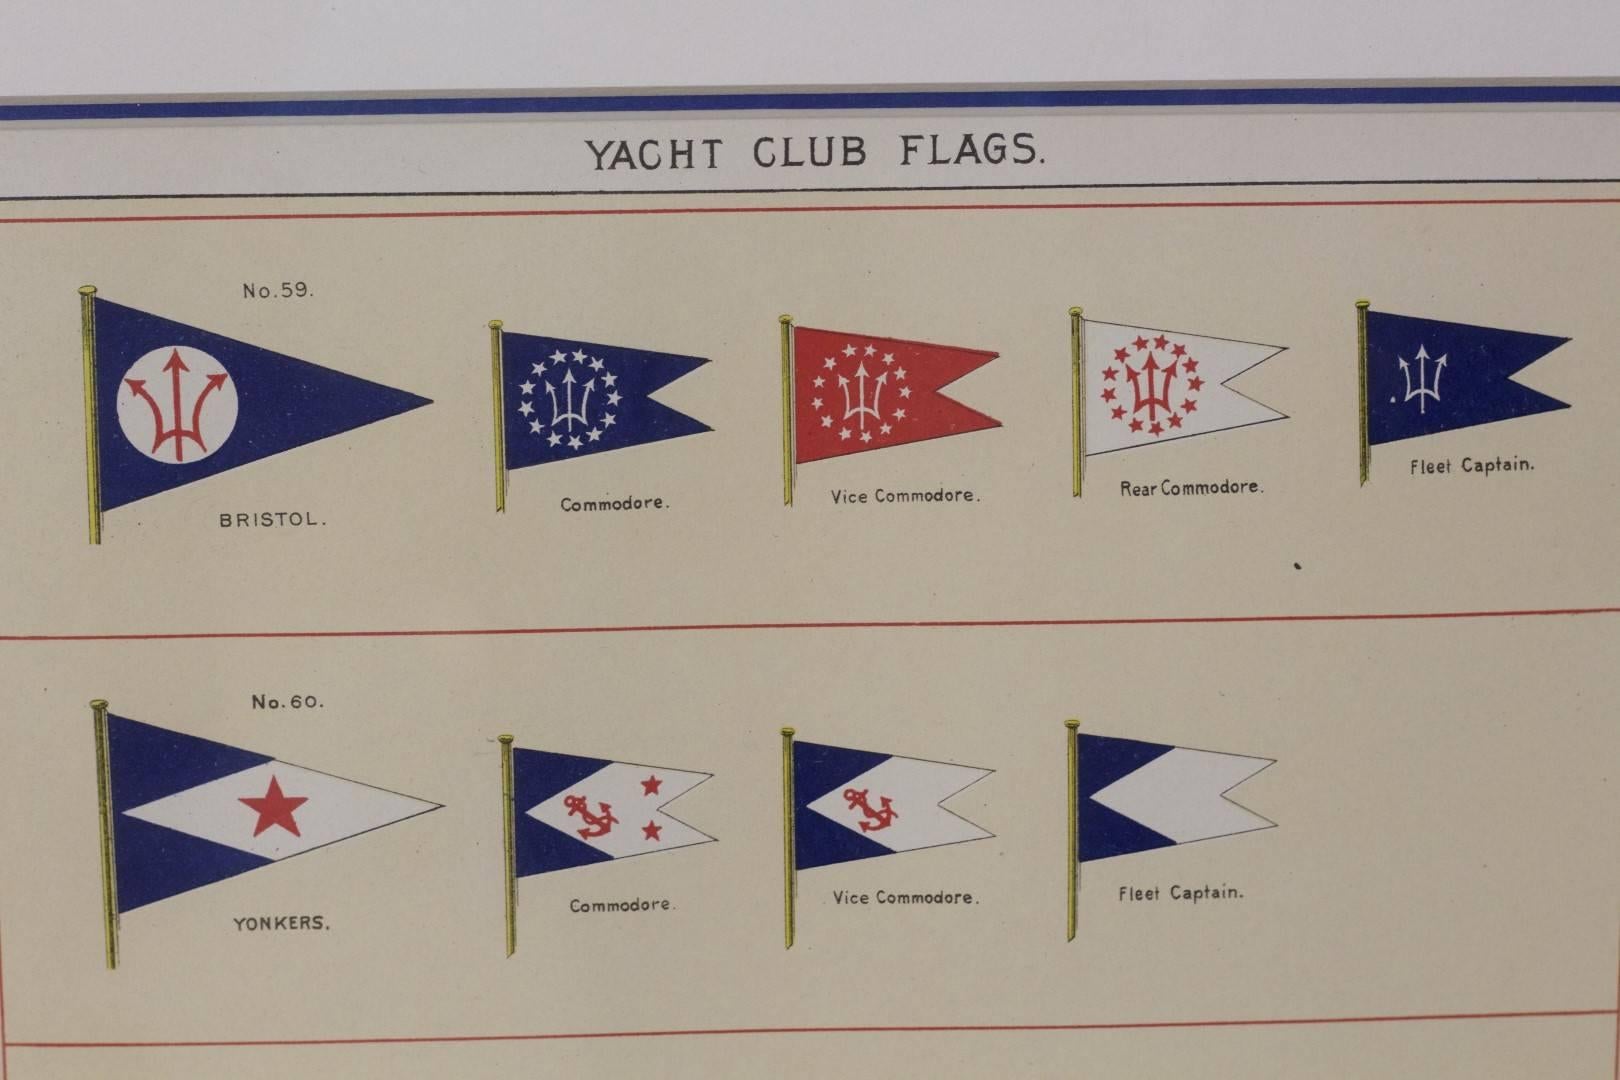 A framed original page from Lloyd's Register, circa 1938. Showing yacht club flags of Bristol, Yonkers, Hull MA. Respective commodore, vice commodre and fleet captain flags. Matted and framed. Dimensions: 13